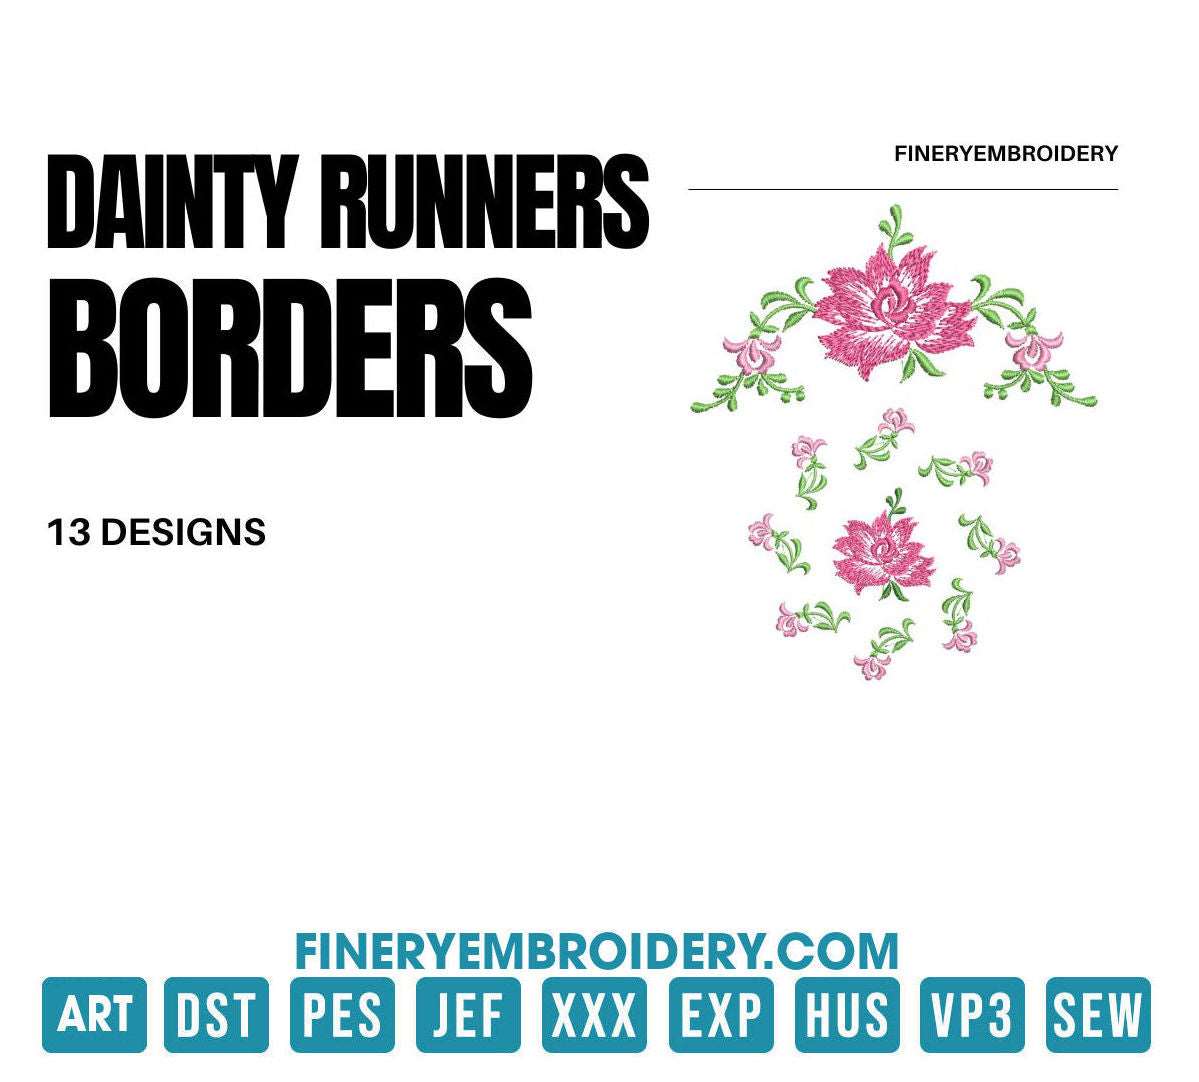 Dainty runners: Embroidery Design Pack FineryEmbroidery